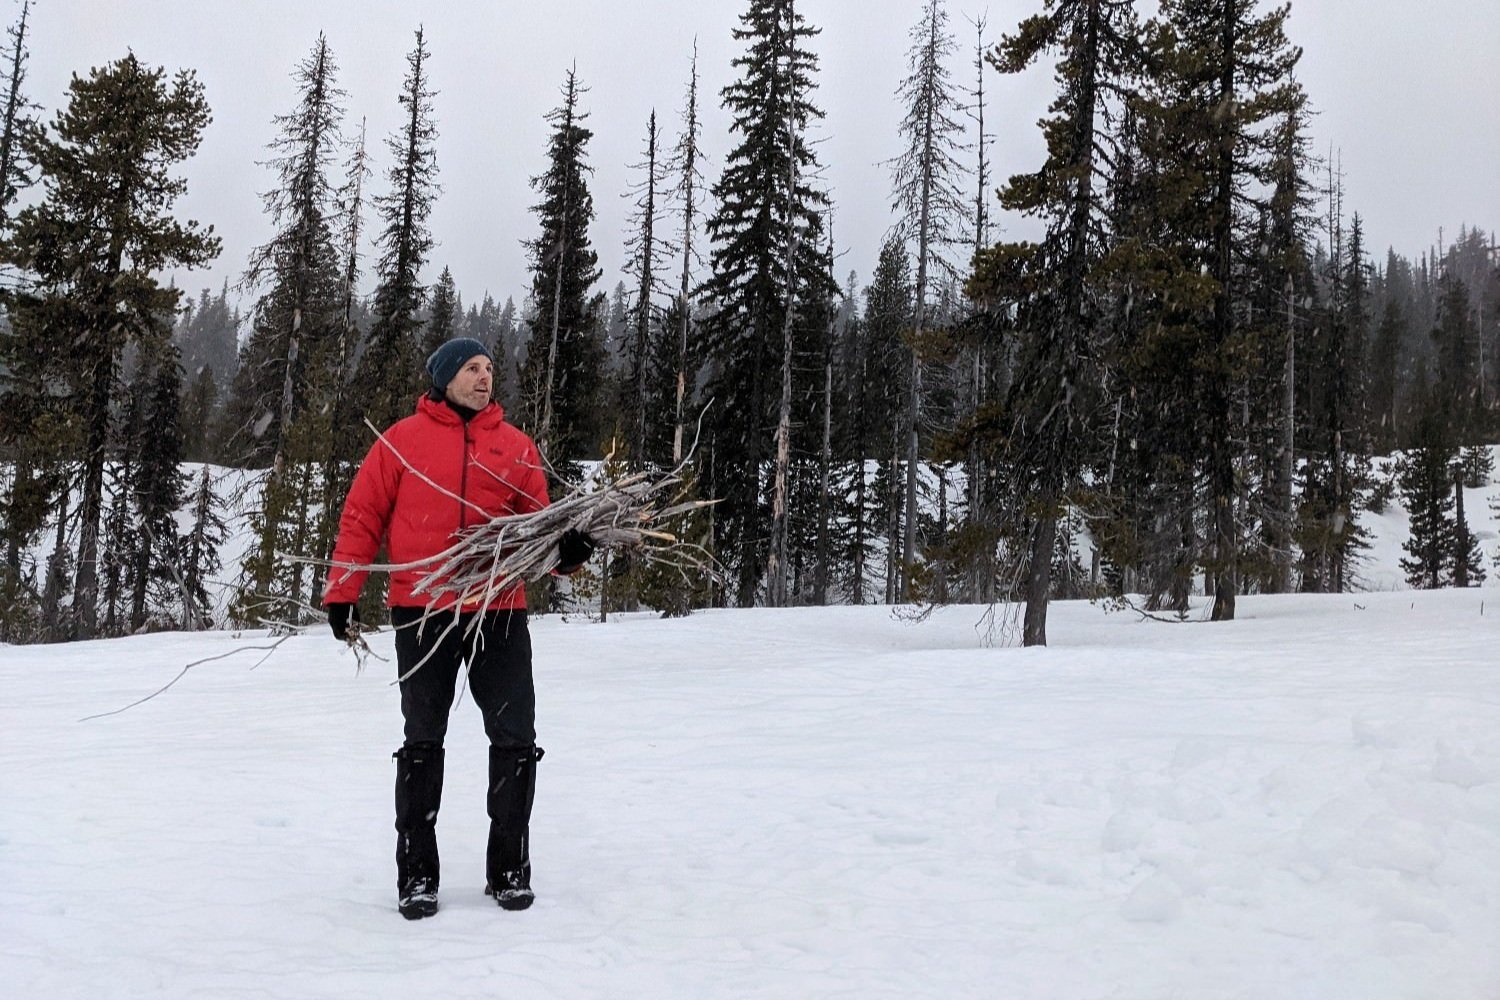 A hiker in the snow carrying an armload of gathered wood